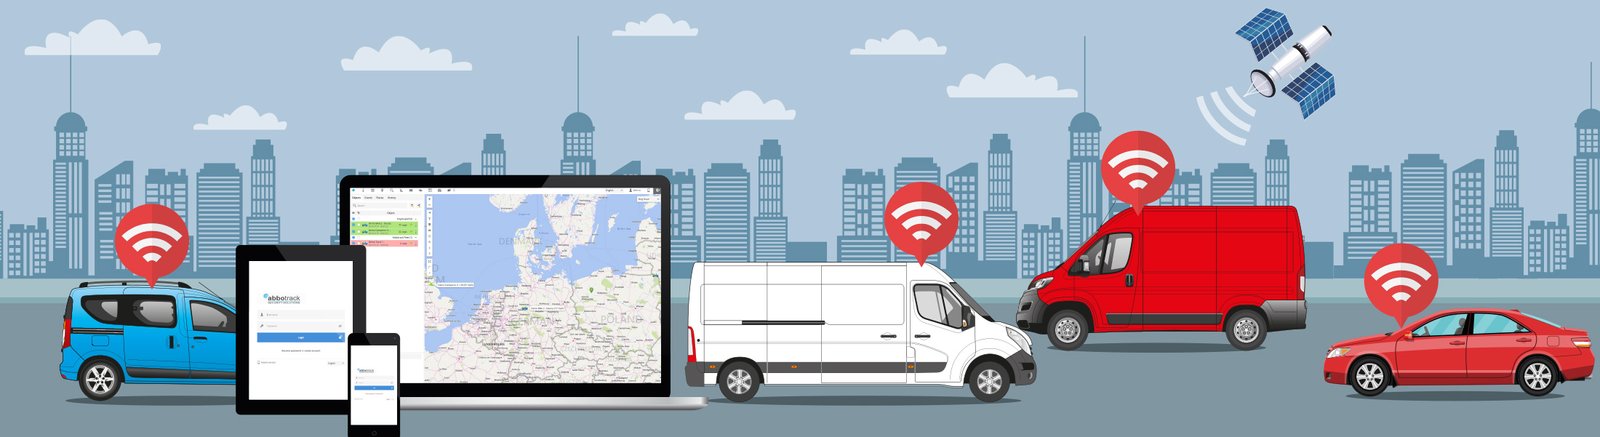 Vehicle GPS Tracking Services - Hull